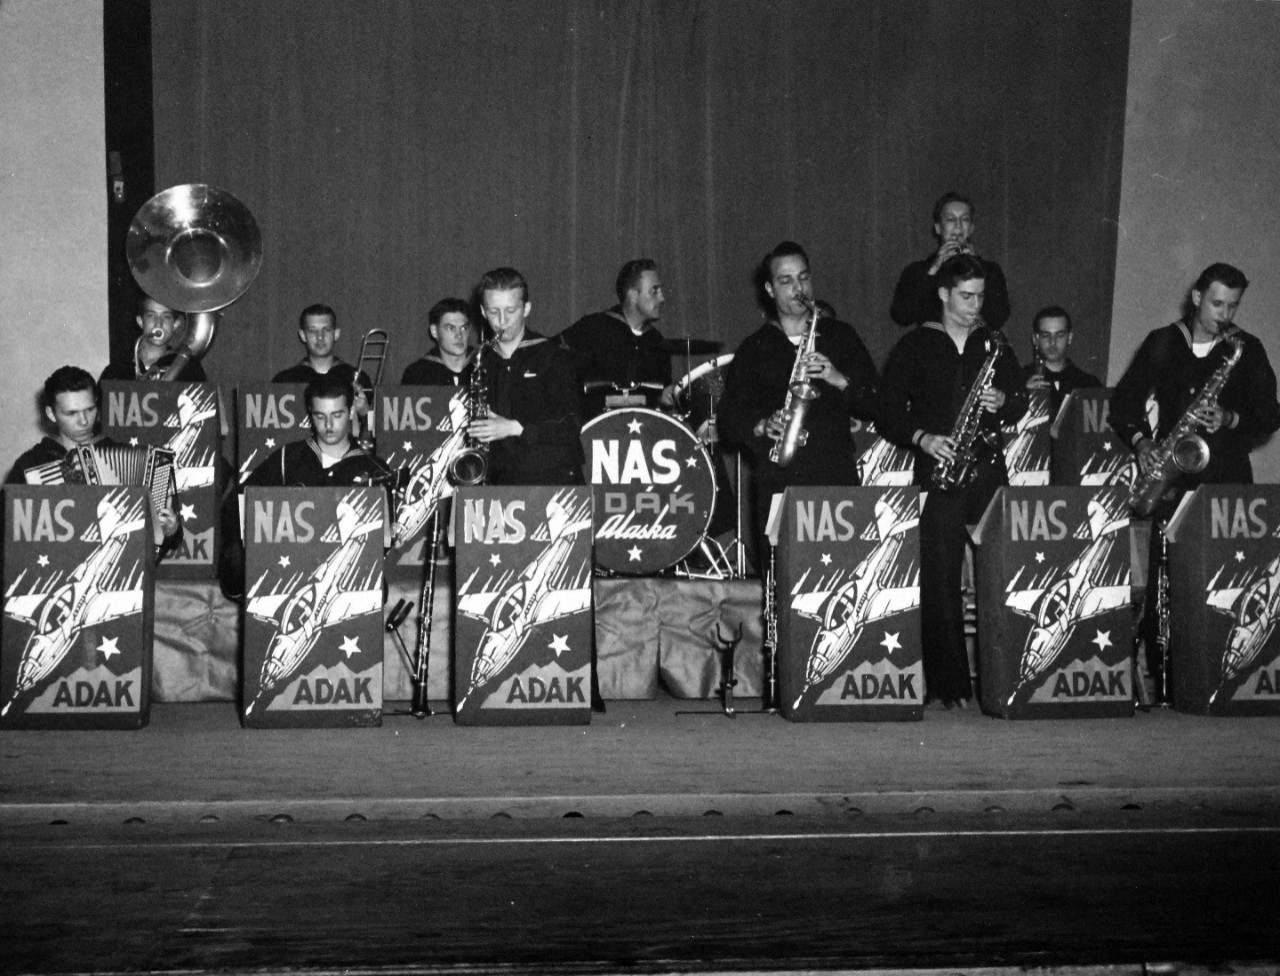 80-G-79444:  U.S. Naval Air Station, Adak, Alaska., August 1943.   Orchestra of Naval Air Station, Adak, Alaska, Aleutian Islands, August 8, 1943.  Official U.S. Navy Photograph, now in the collections of the National Archives.   (2015/8/18). 